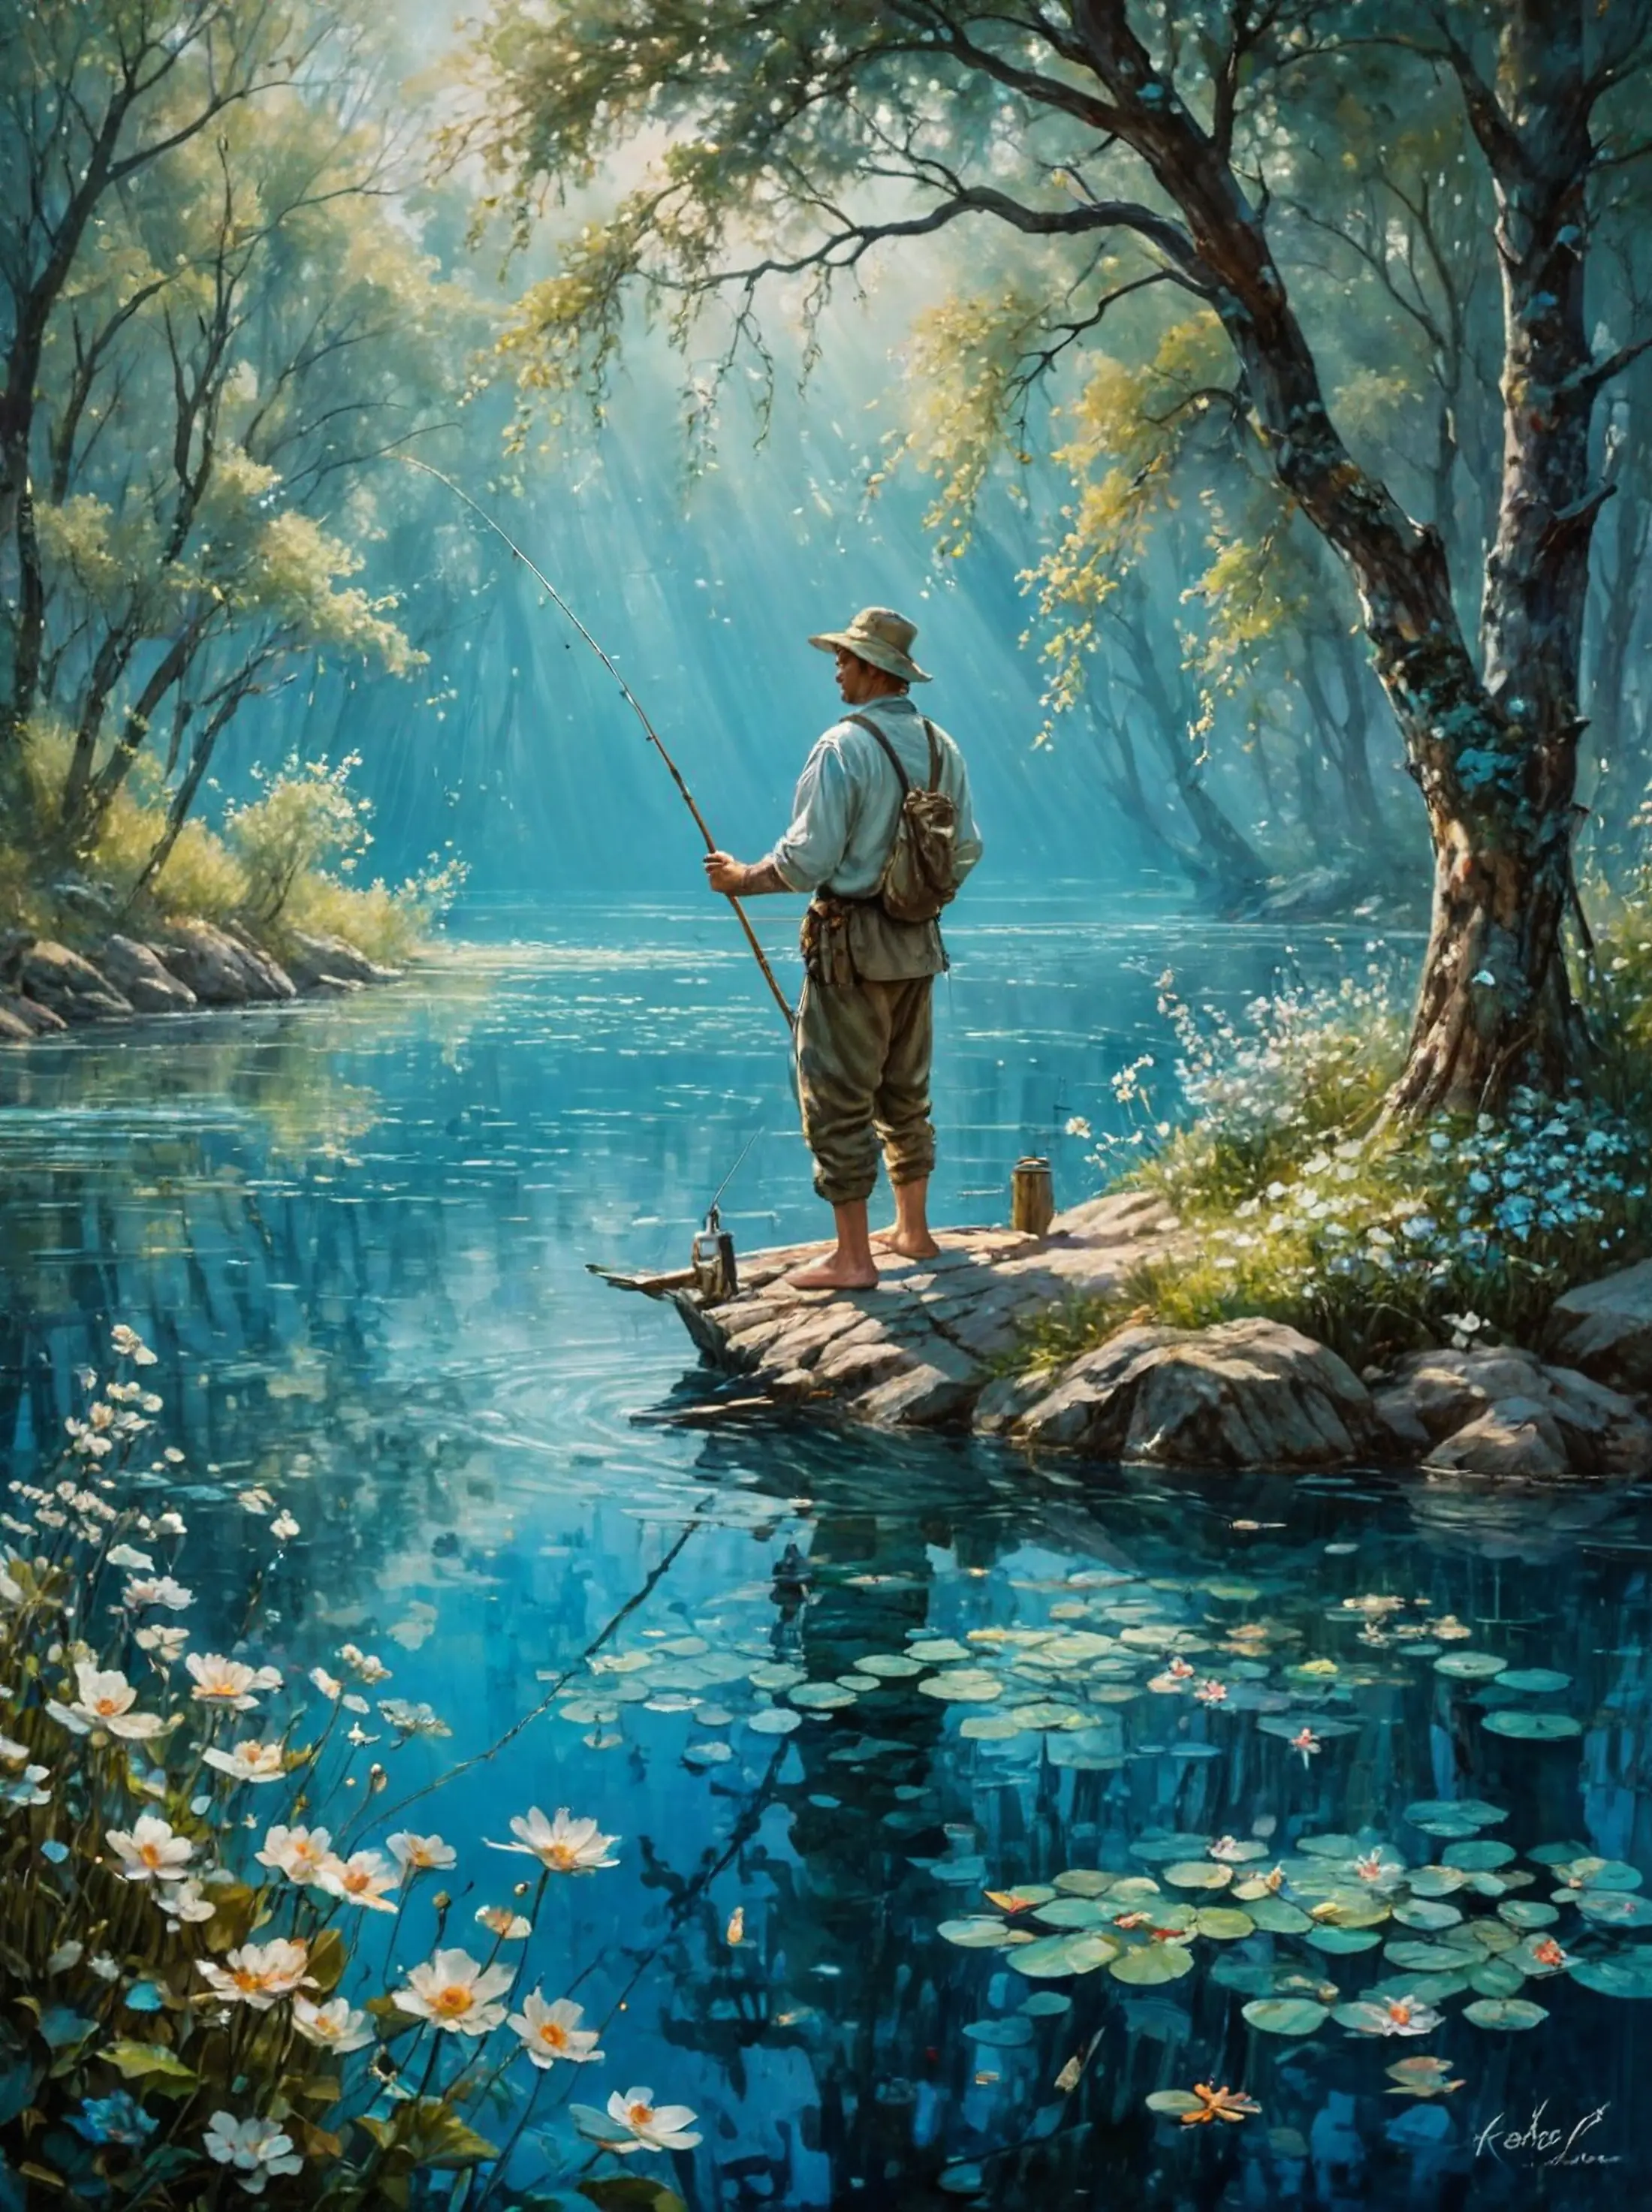 A man, dressed in neutral tones and wearing a hat, stands at the edge of a calm stream dotted with blooming water lilies, engrossed in fishing. The surrounding landscape is lush with greenery, and the sunlight filtering through the trees casts a soft glow on the scene. 